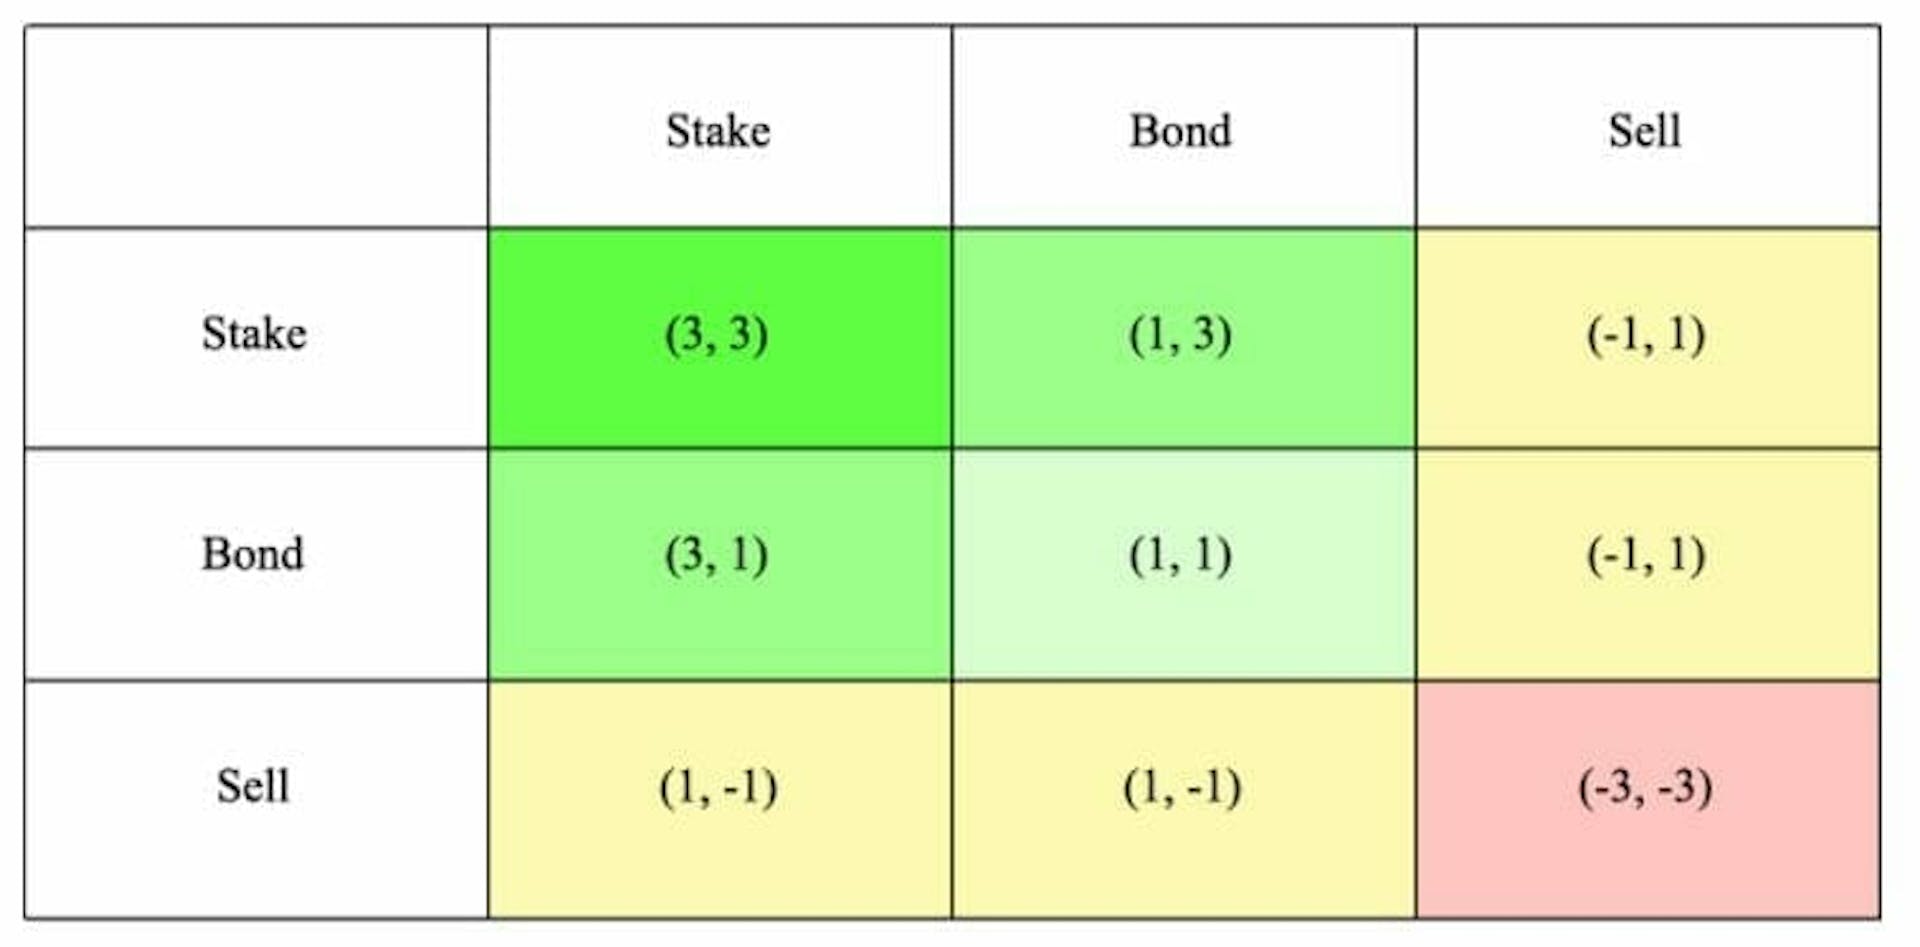 Table showing the rewards and losses for each actor in Olympus DAOs (3,3) model